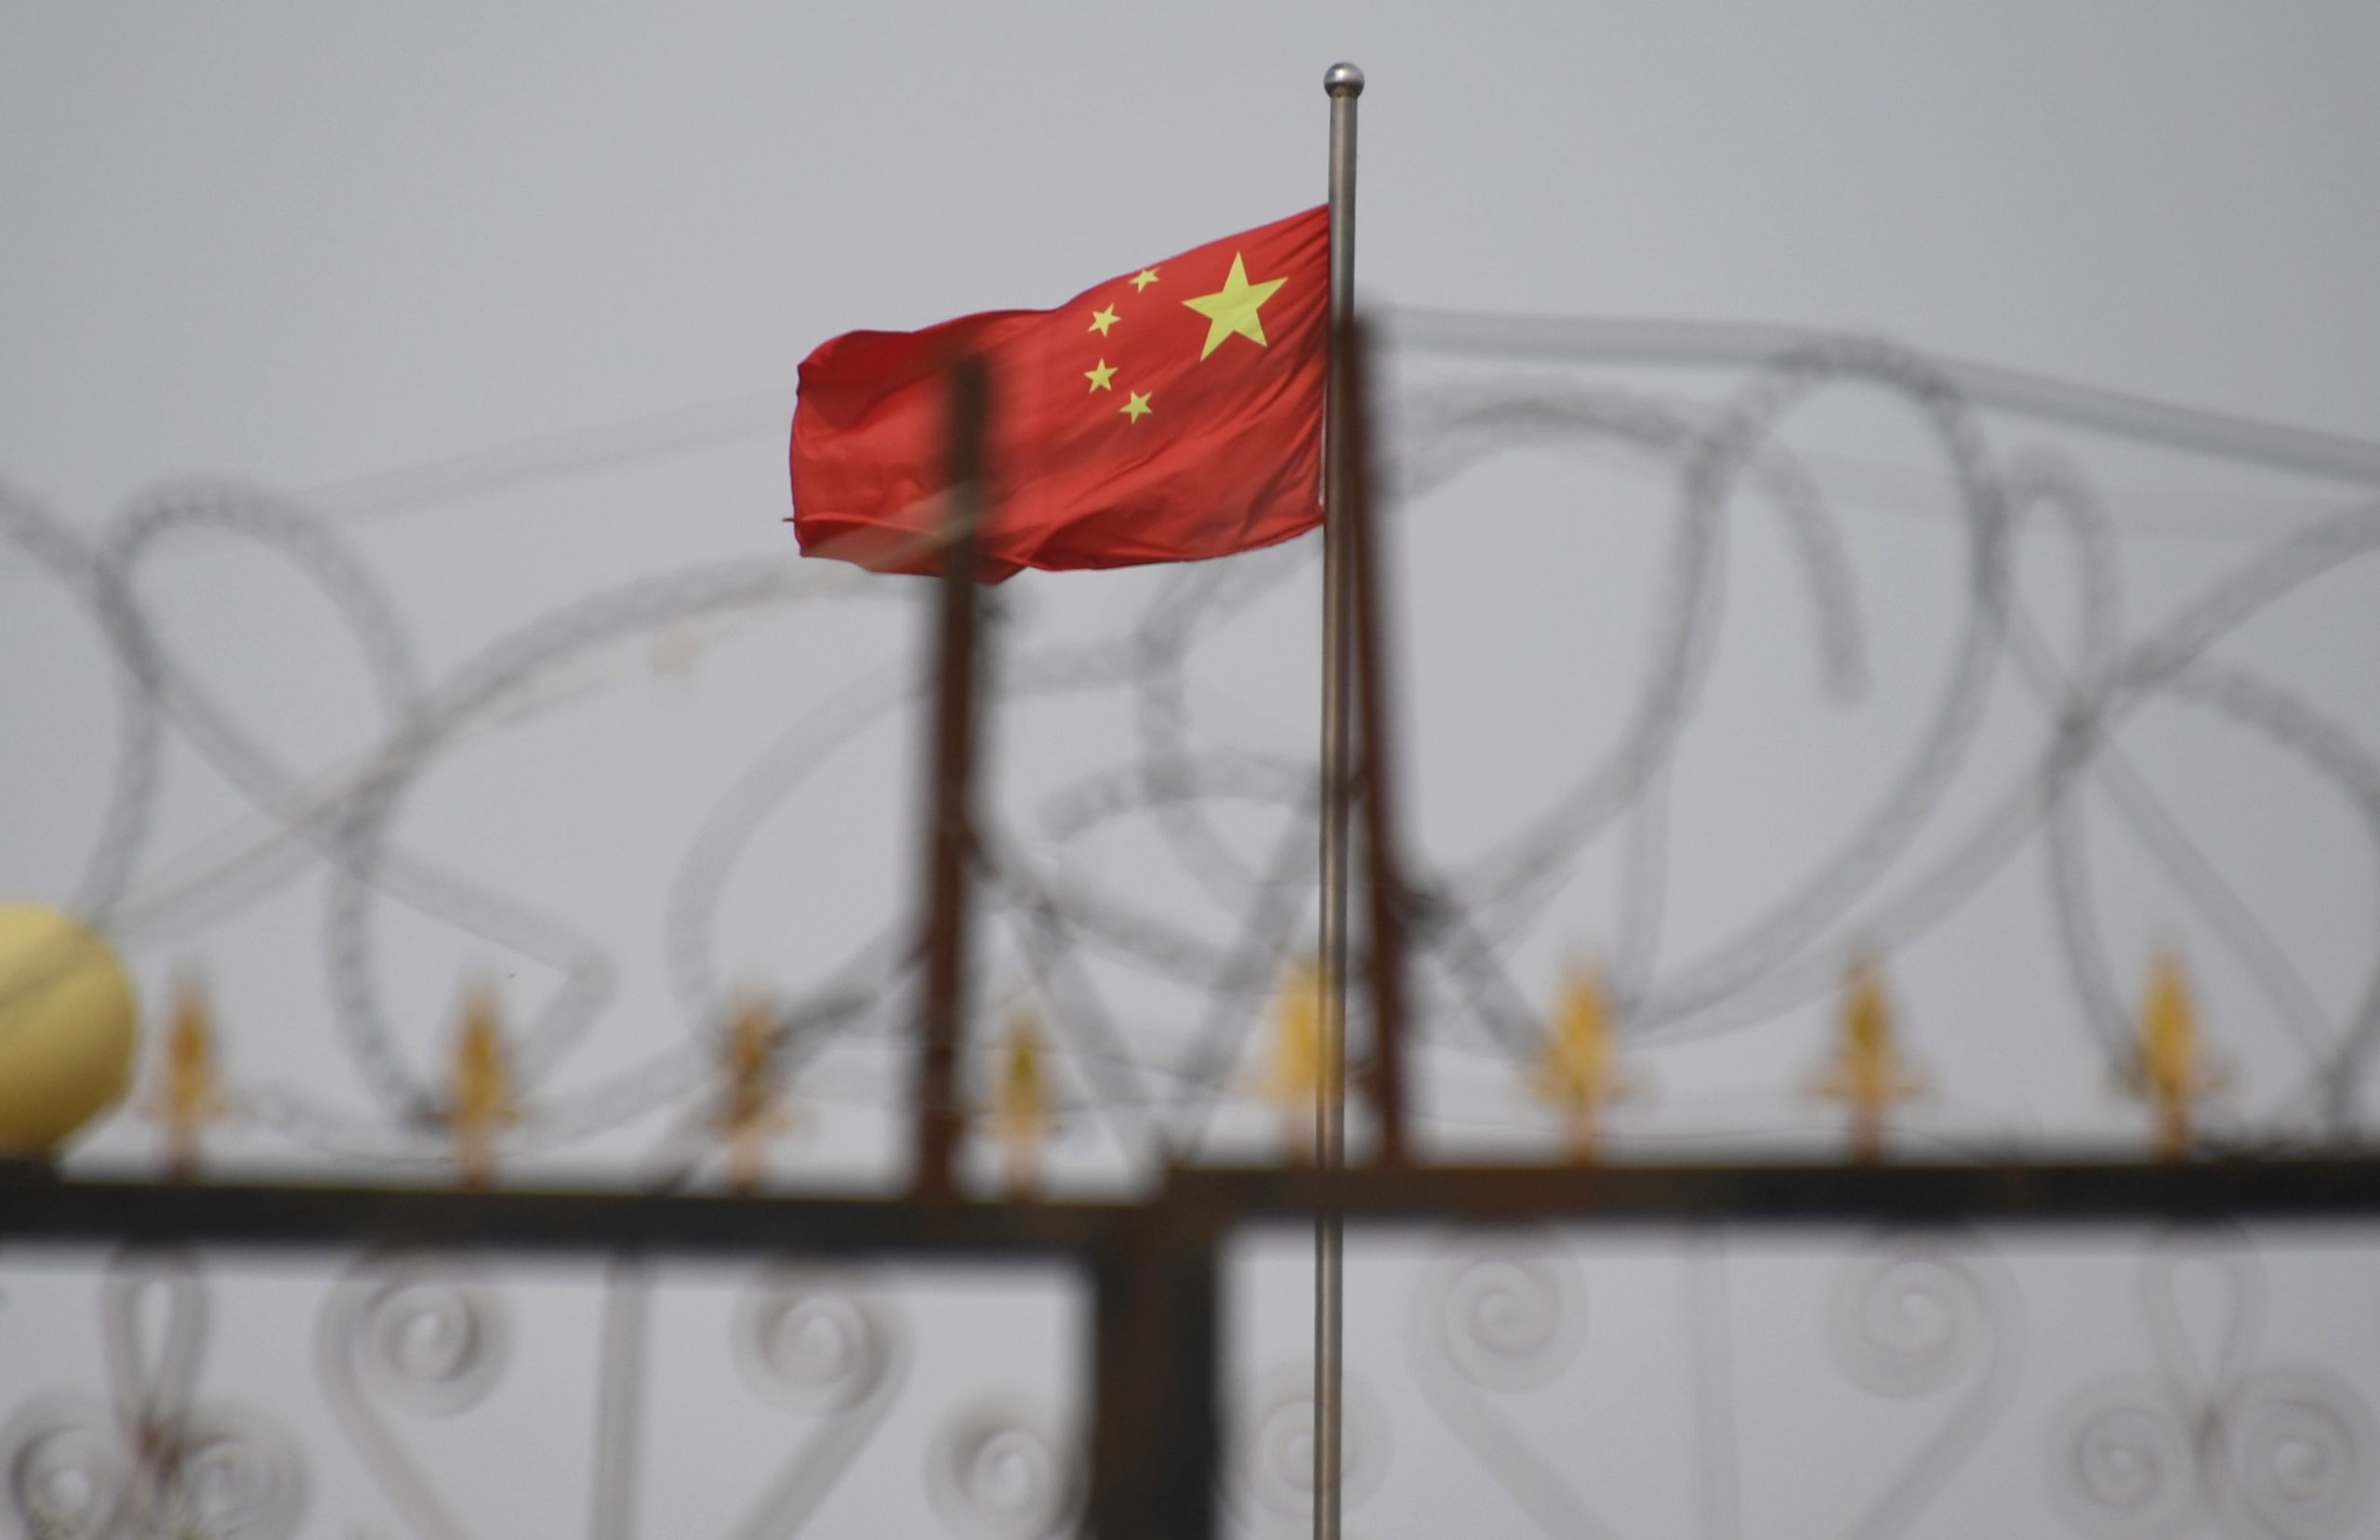 TOPSHOT - This photo taken on June 4, 2019 shows the Chinese flag behind razor wire at a housing compound in Yangisar, south of Kashgar, in China's western Xinjiang region. - A recurrence of the Urumqi riots which left nearly 200 people dead a decade ago is hard to imagine in today's Xinjiang, a Chinese region whose Uighur minority is straitjacketed by surveillance and mass detentions. A pervasive security apparatus has subdued the ethnic unrest that has long plagued the region. (Photo by GREG BAKER / AFP) (Photo by GREG BAKER/AFP via Getty Images)